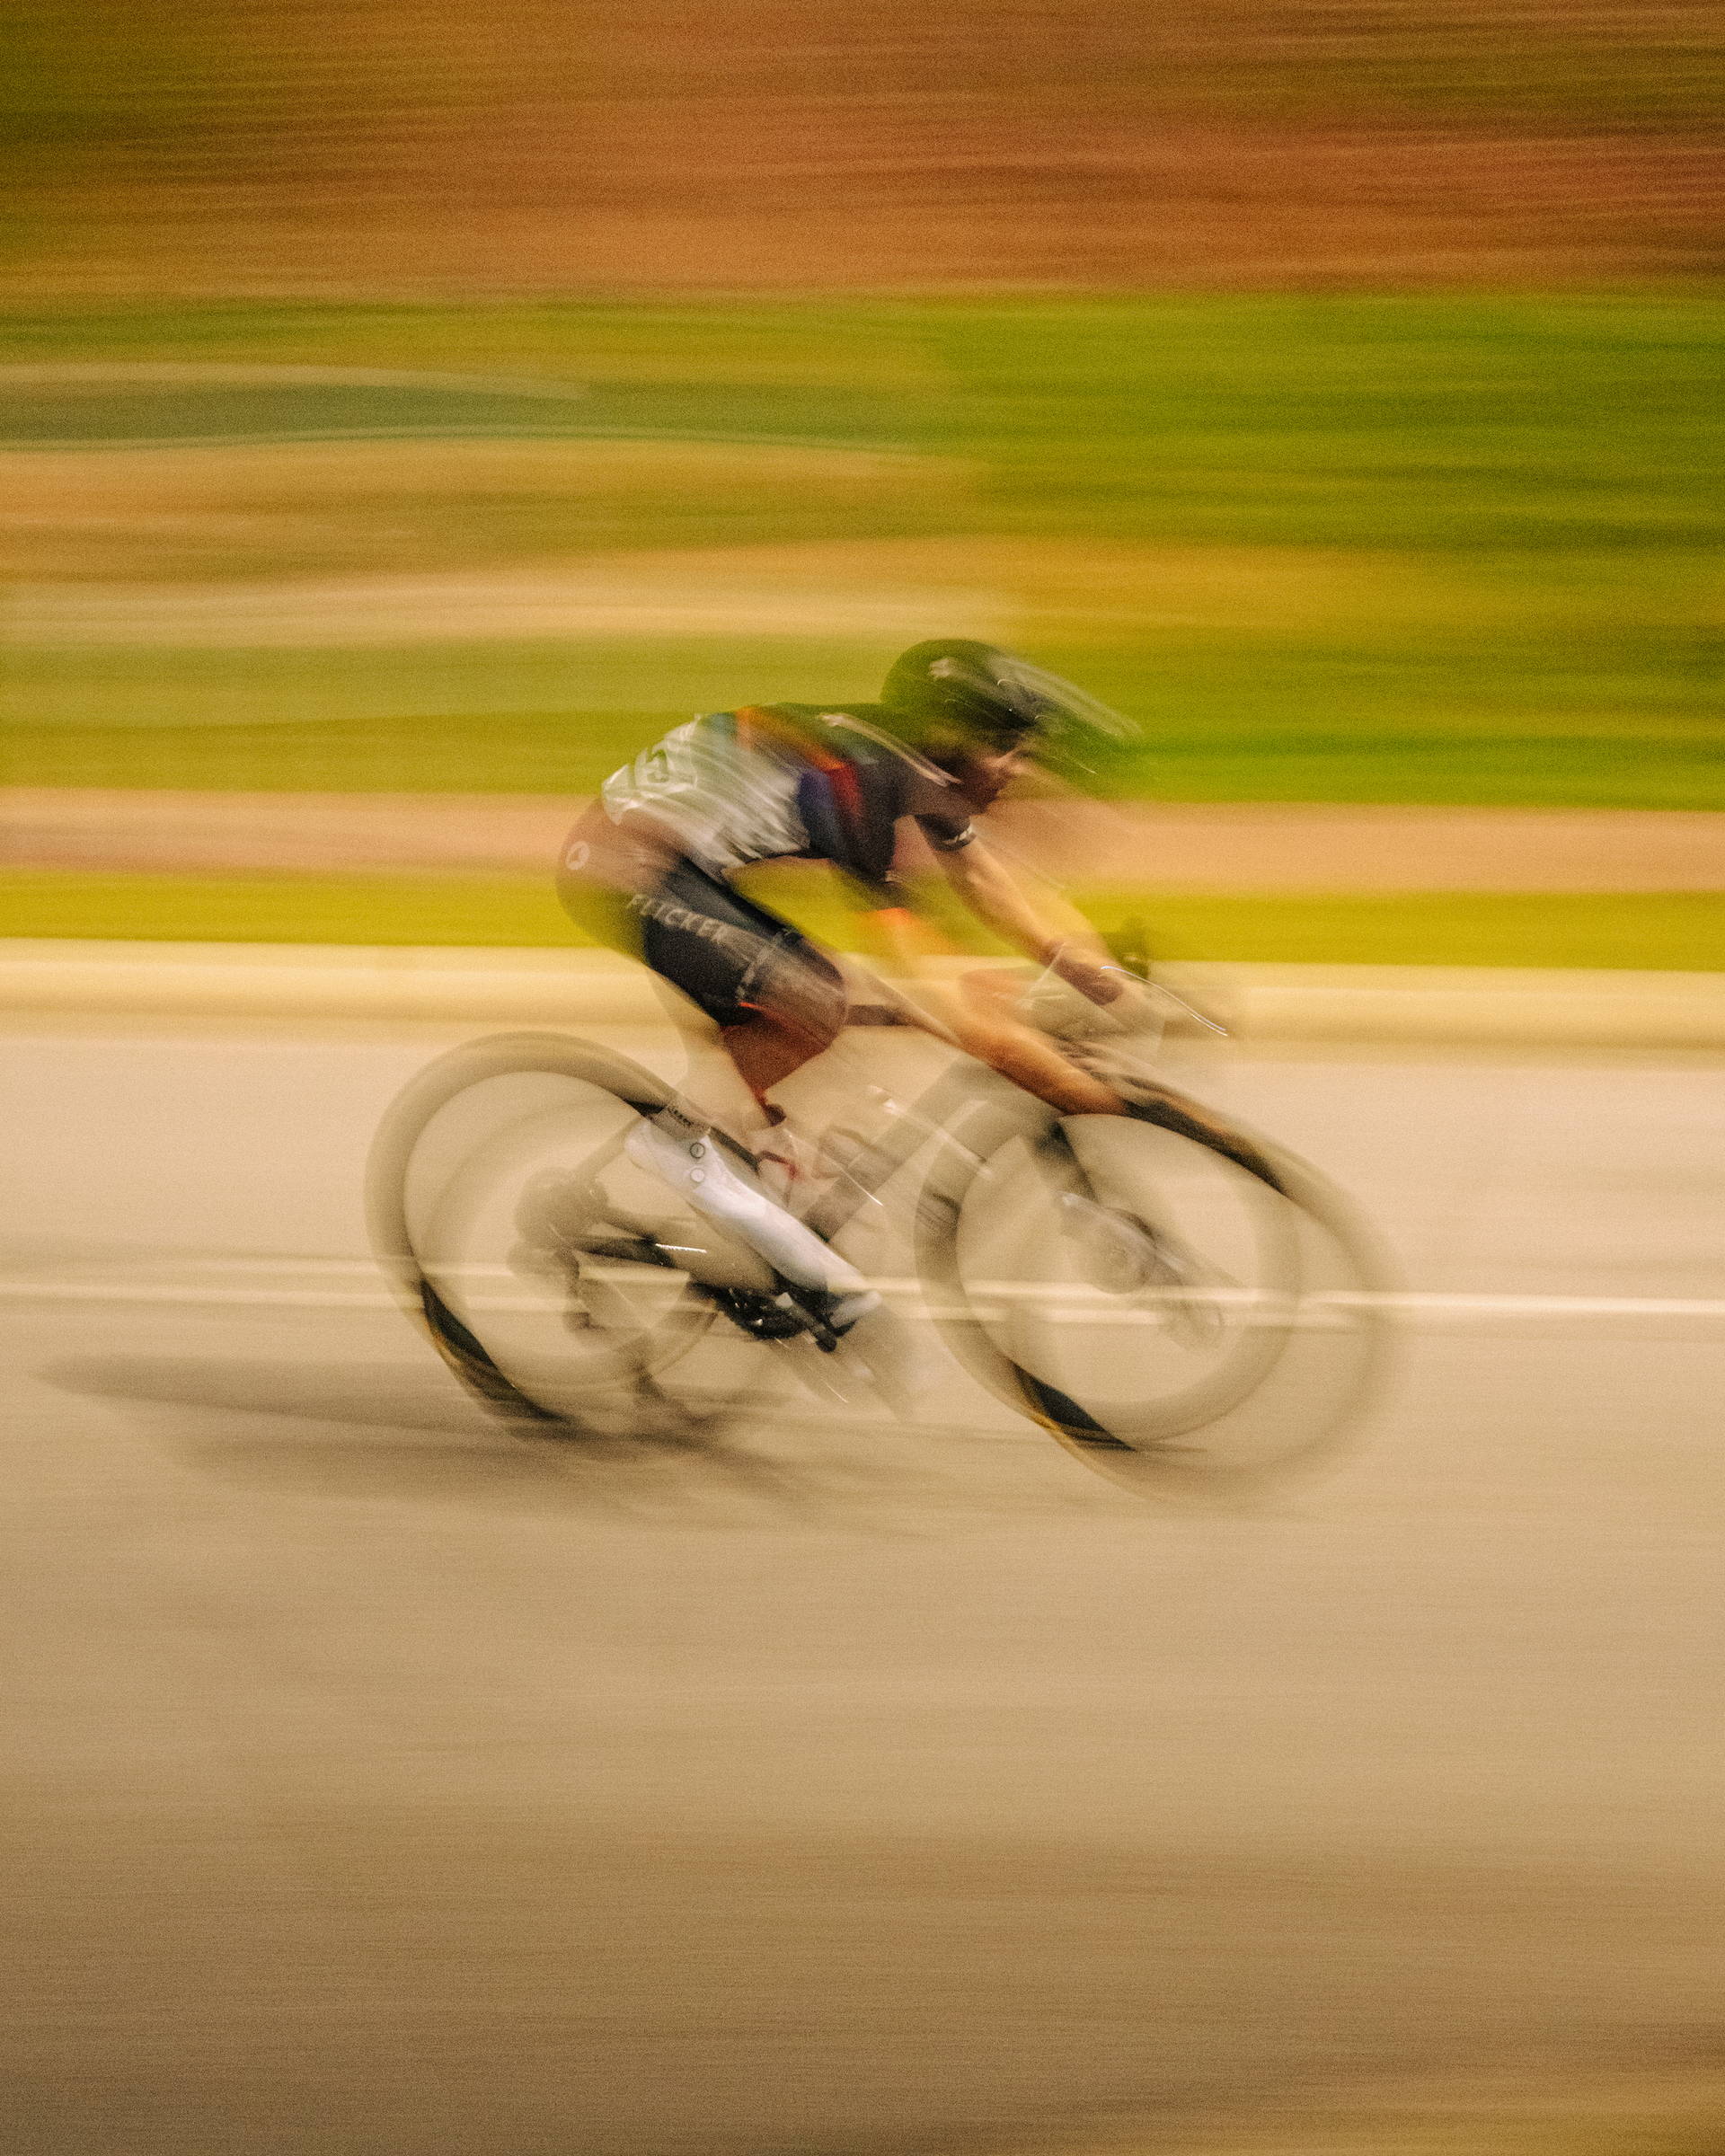 Team Flicker Racing at the the Athens Twilight Criterium